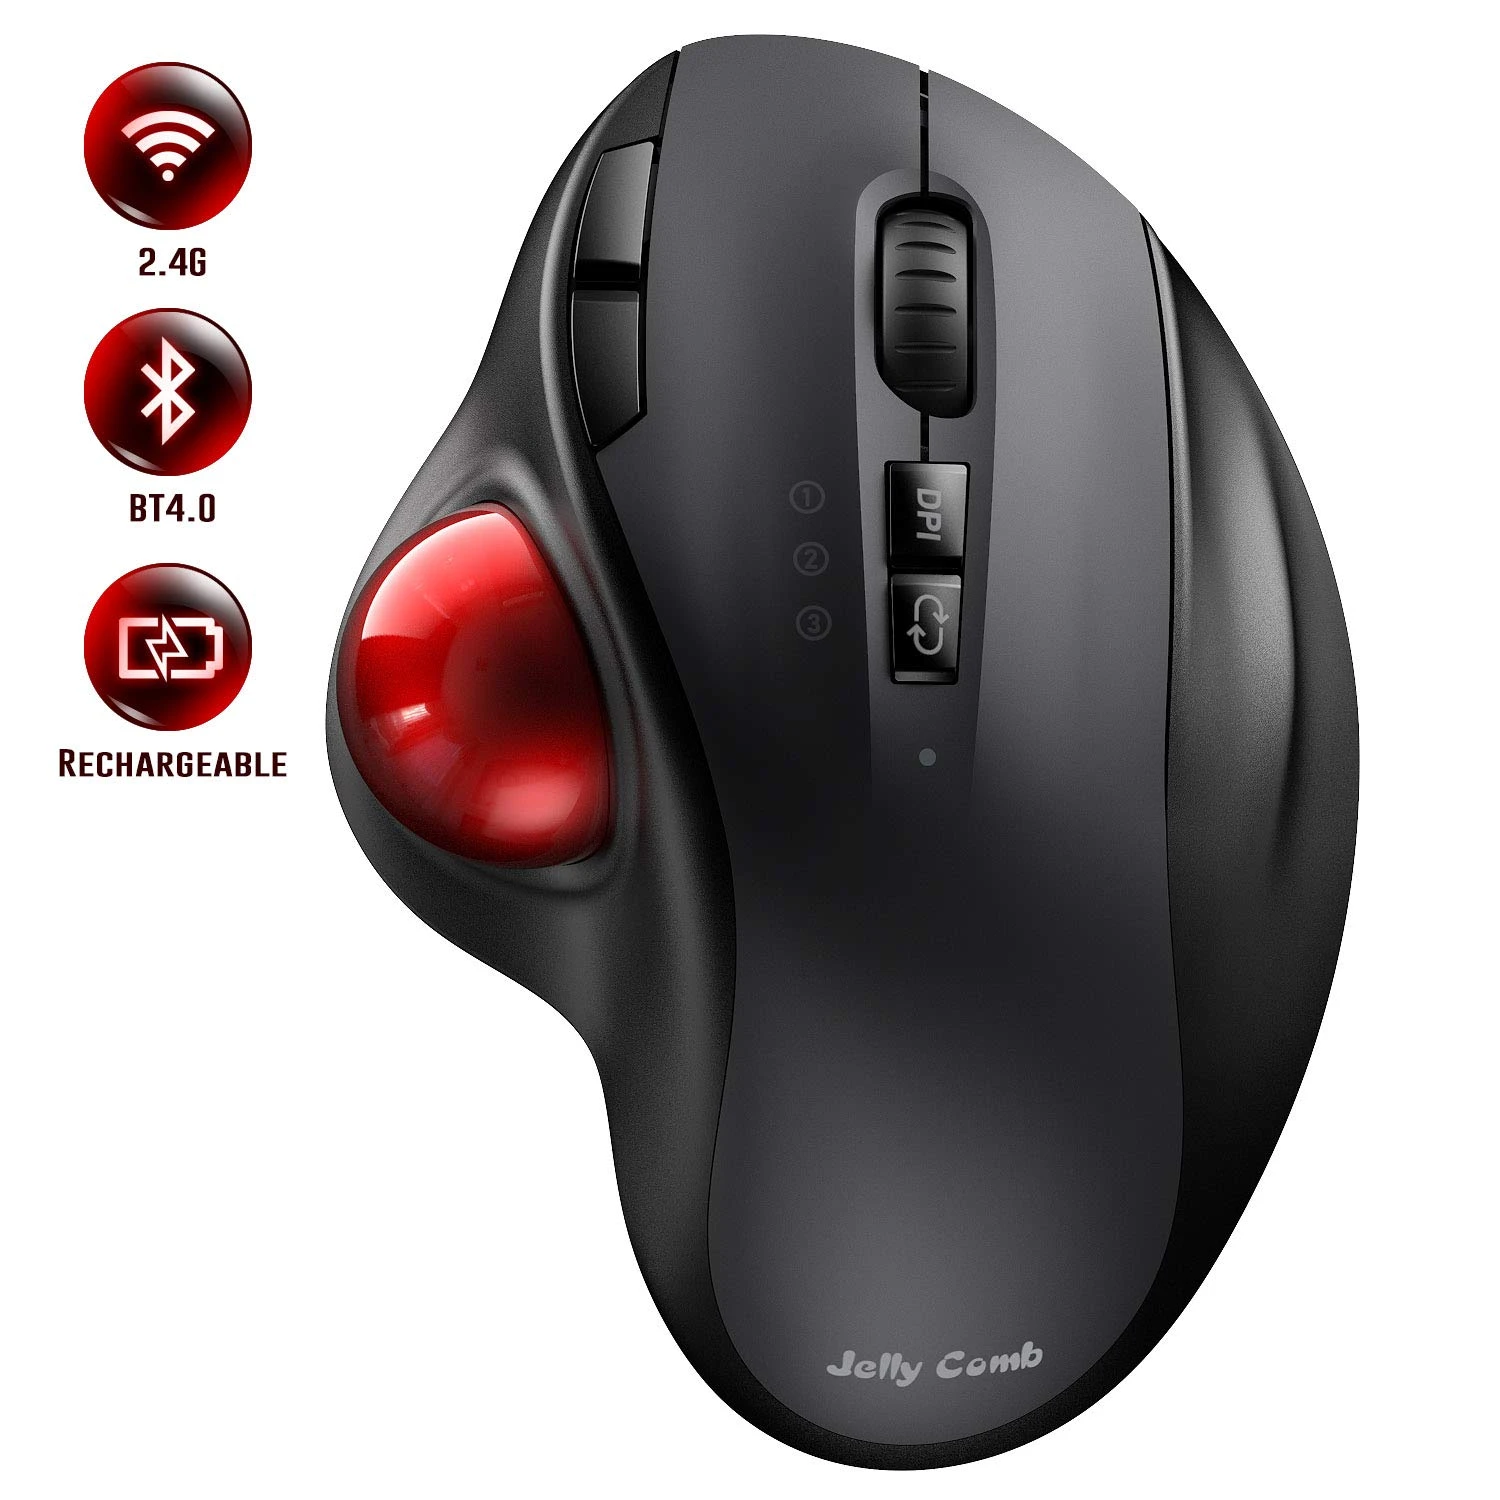 white gaming mouse wireless Trackball Bluetooth Mouse Rechargeable 2.4G USB Mouse Ergonomic Mice for Computer Android Windows 3 Adjustable DPI cool computer mouse